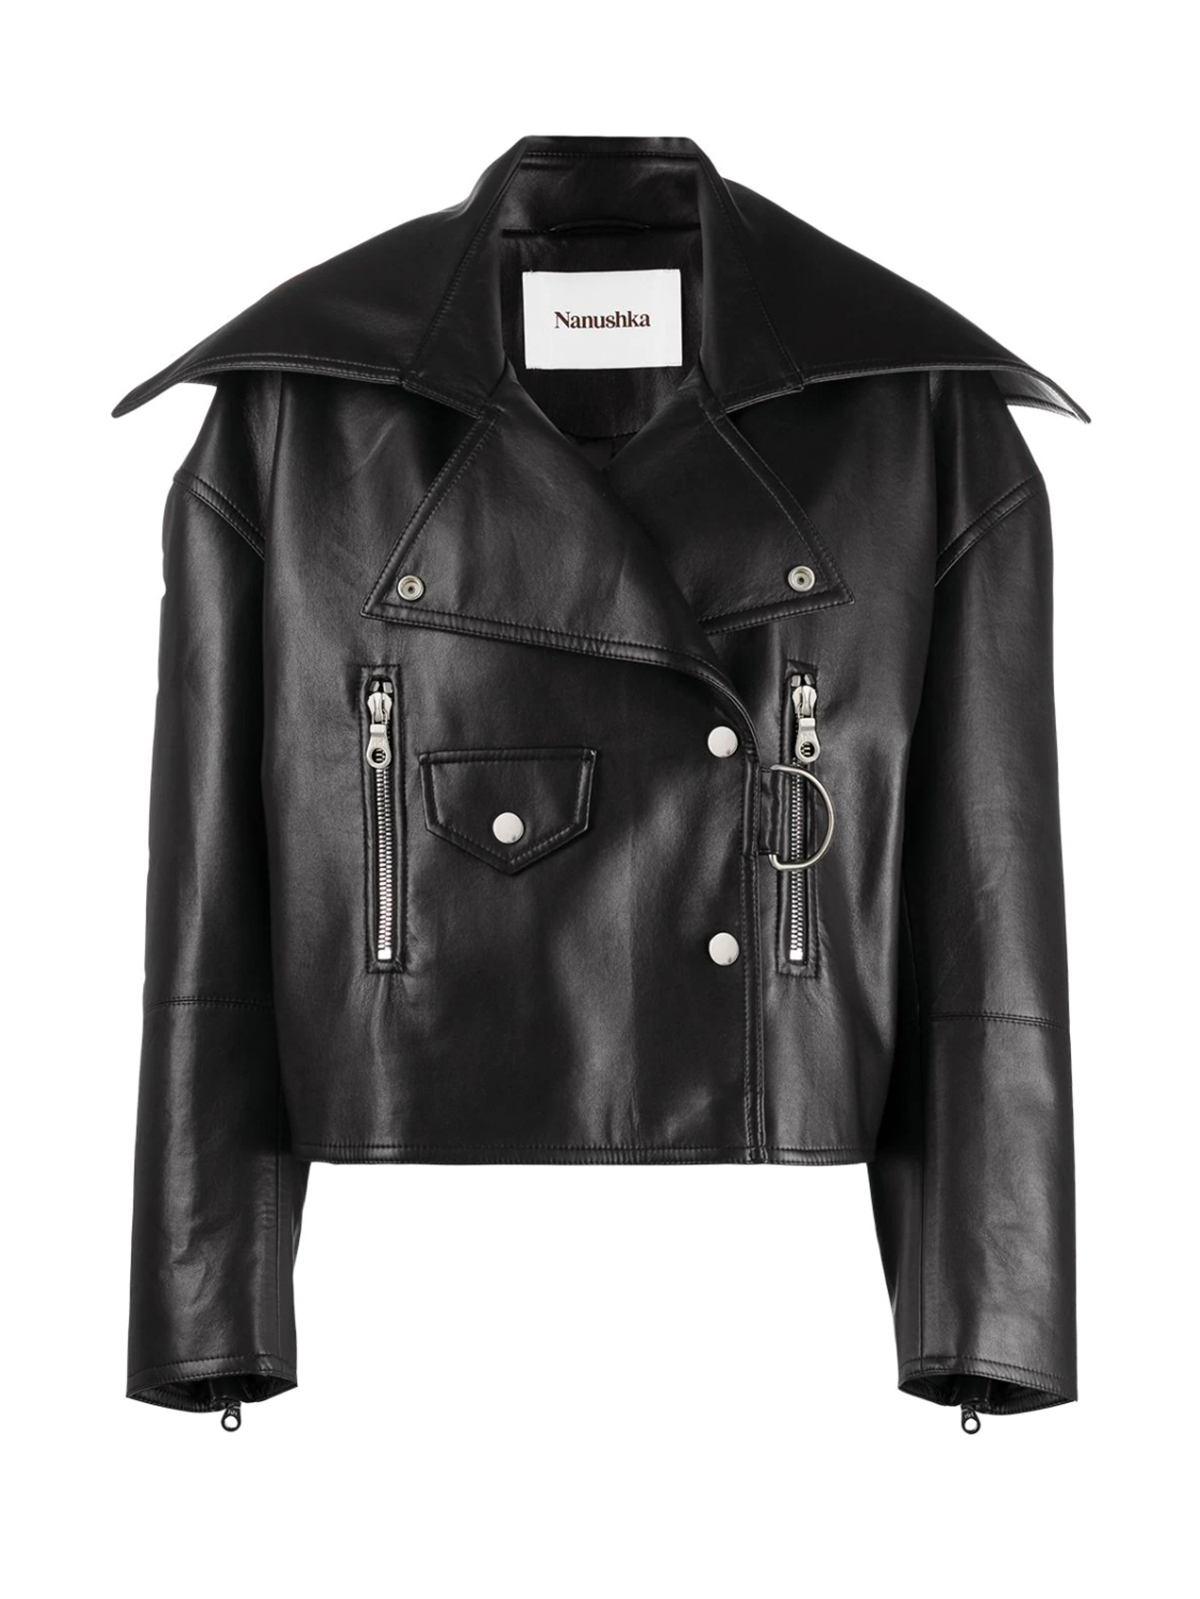 24 Trending Biker Jackets to Buy This Spring | Who What Wear